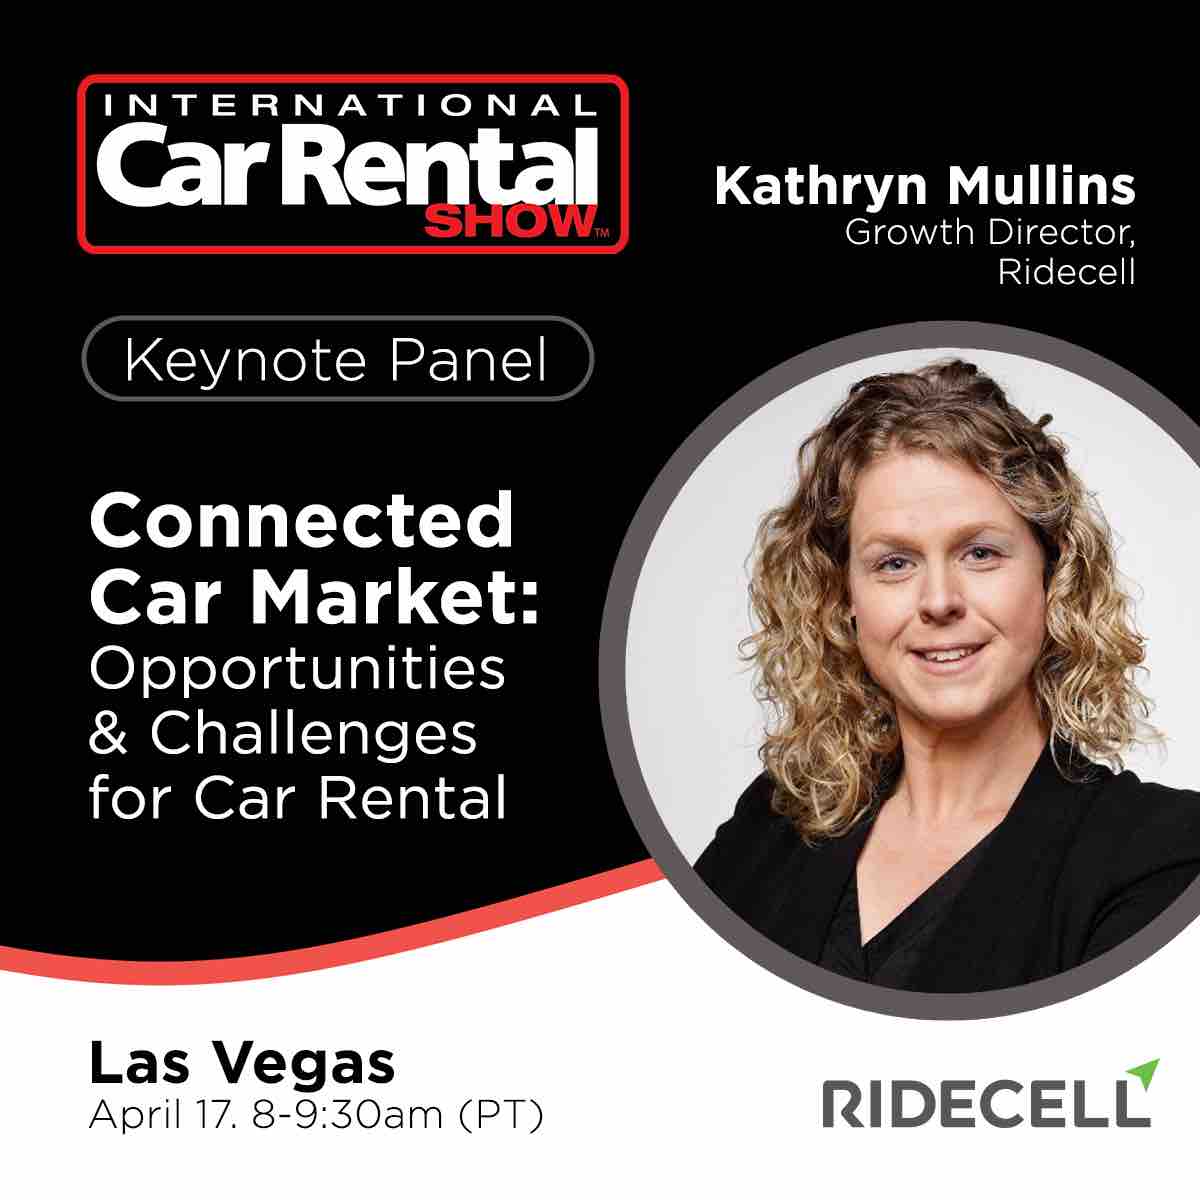 Attending #ICRS2024 in Las Vegas? Learn about the challenges and opportunities in the #connectedcar market in this keynote panel with Kathryn Mullins, growth director at Ridecell. Register if you haven’t yet, and we hope to see you there! internationalcarrentalshow.com

#connectedfleets